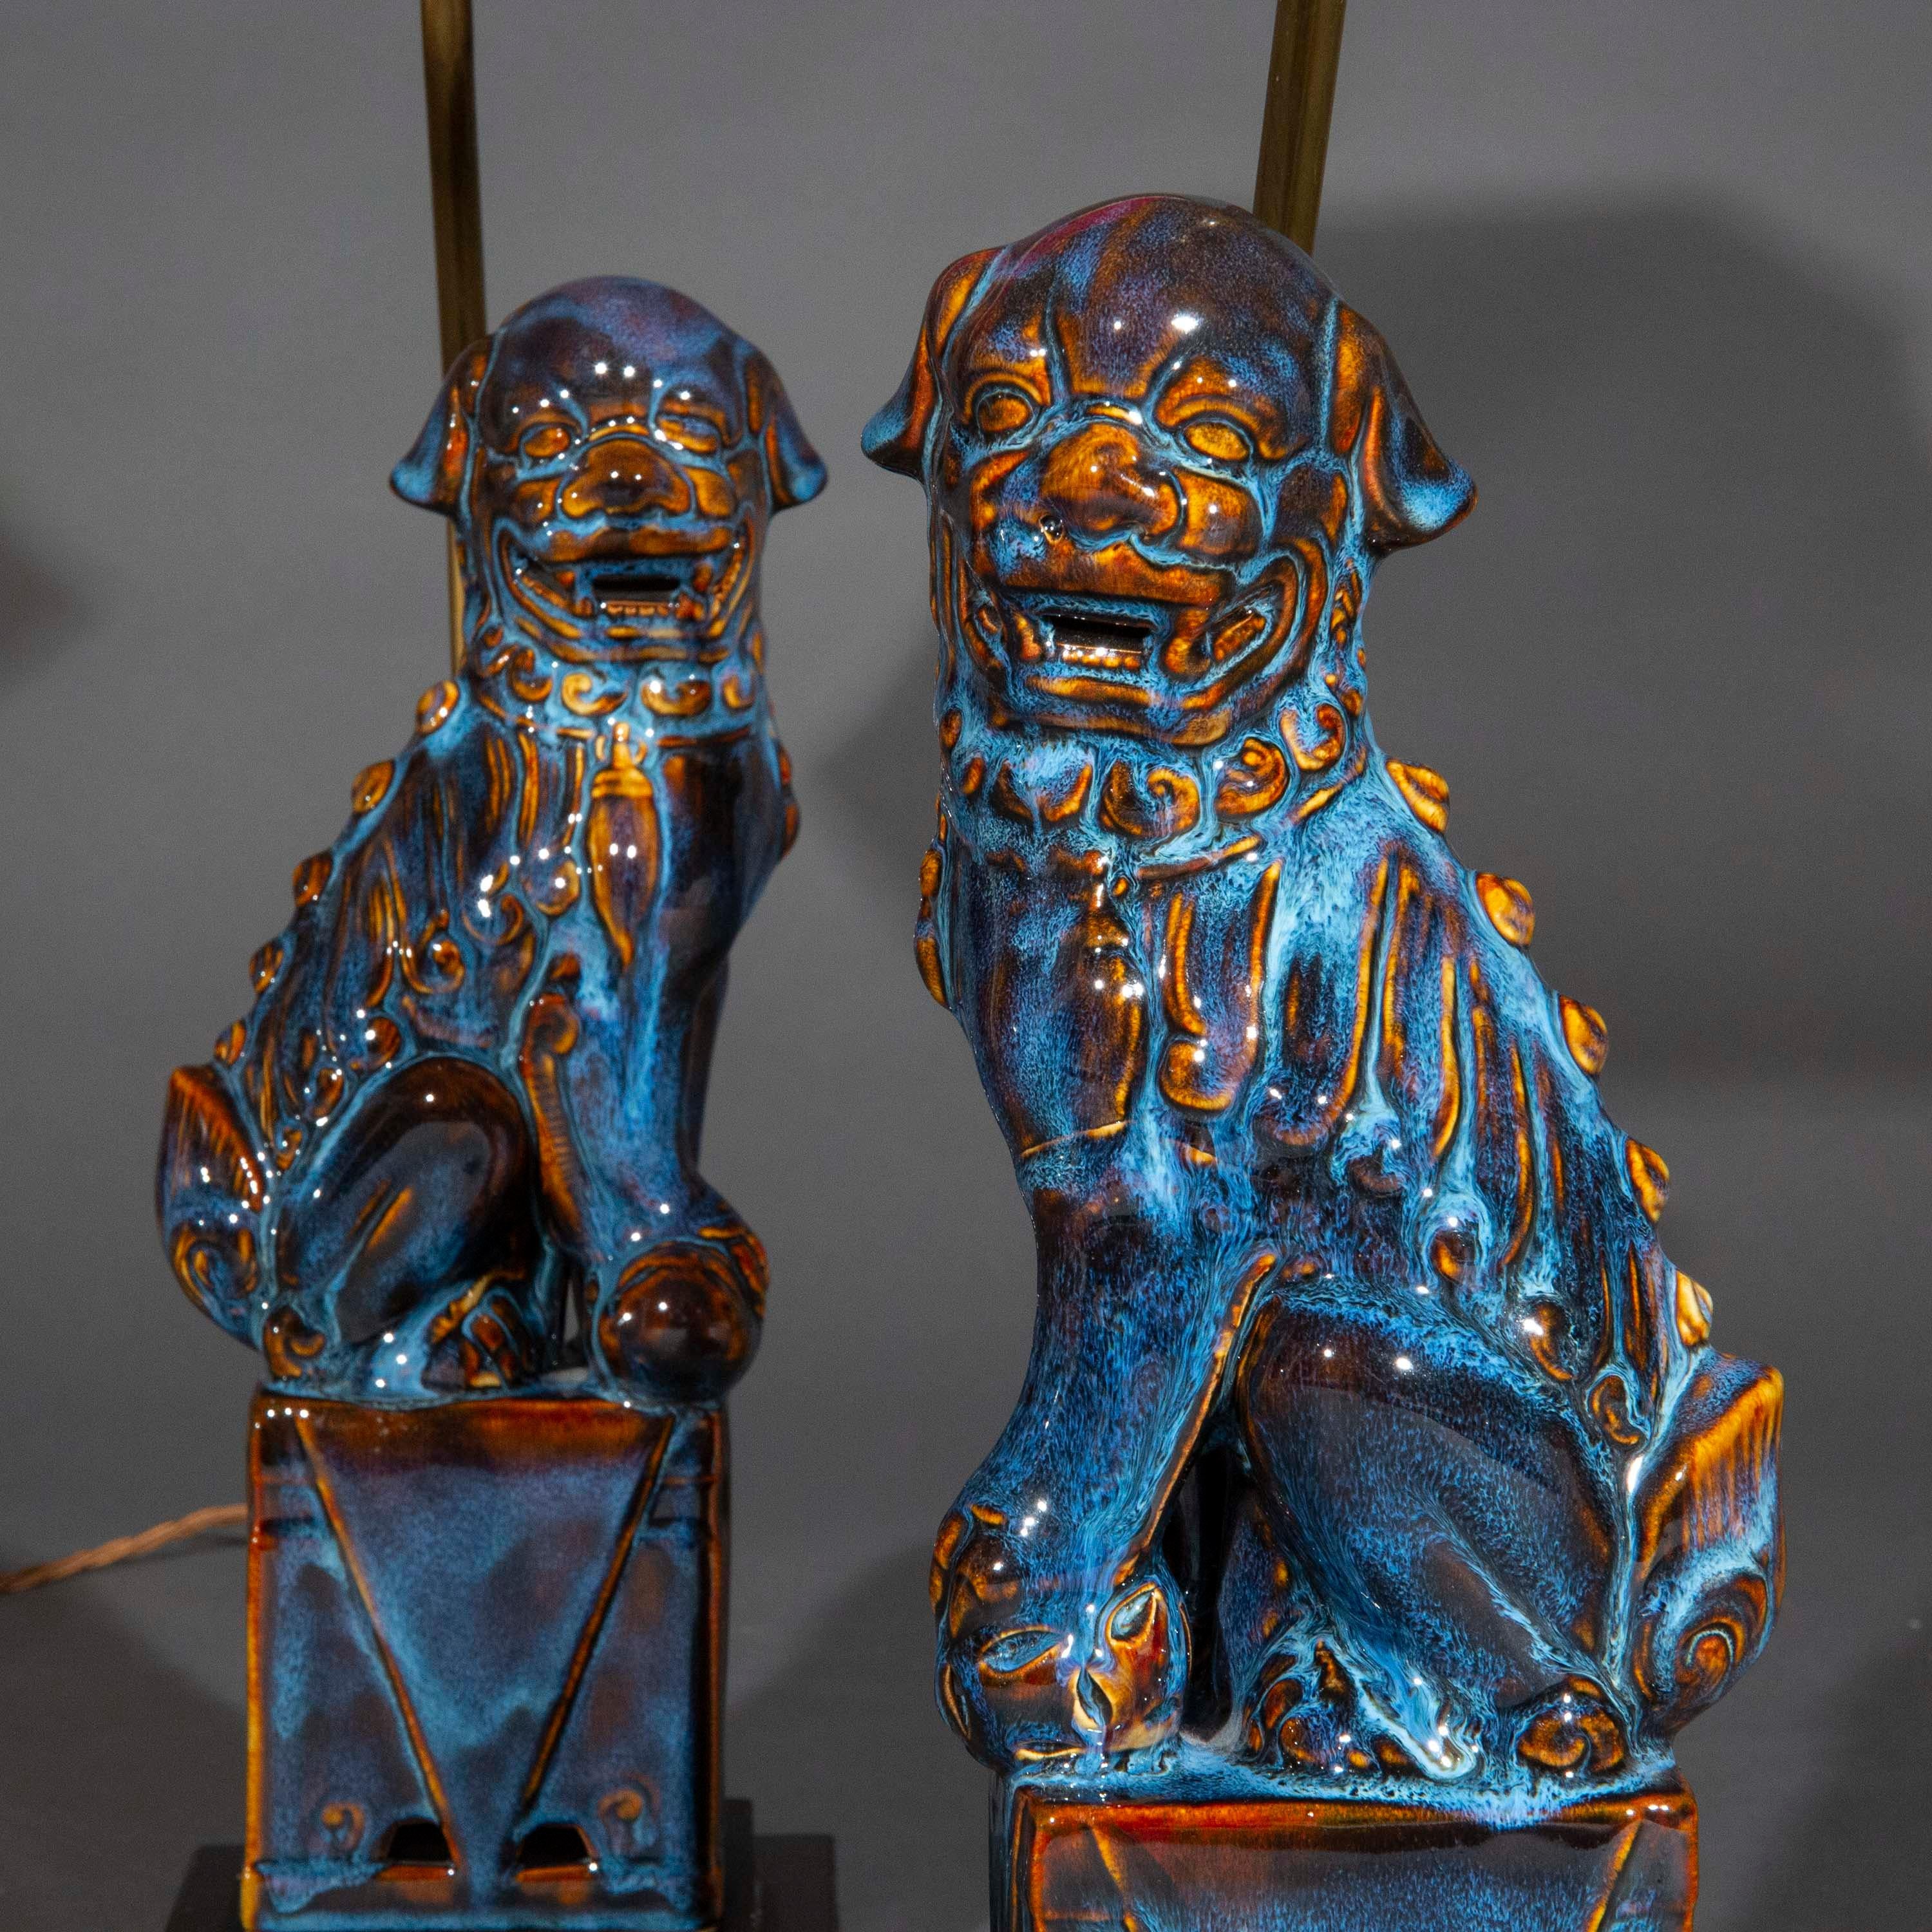 Fabulous pair of table lamps featuring wonderfully decorative ceramic figures of foo dogs, or buddhist temple lions, beautifully glazed with purple and blue streaks (flambé).

We love the opulence of colours and the intricate pattern of the glaze.